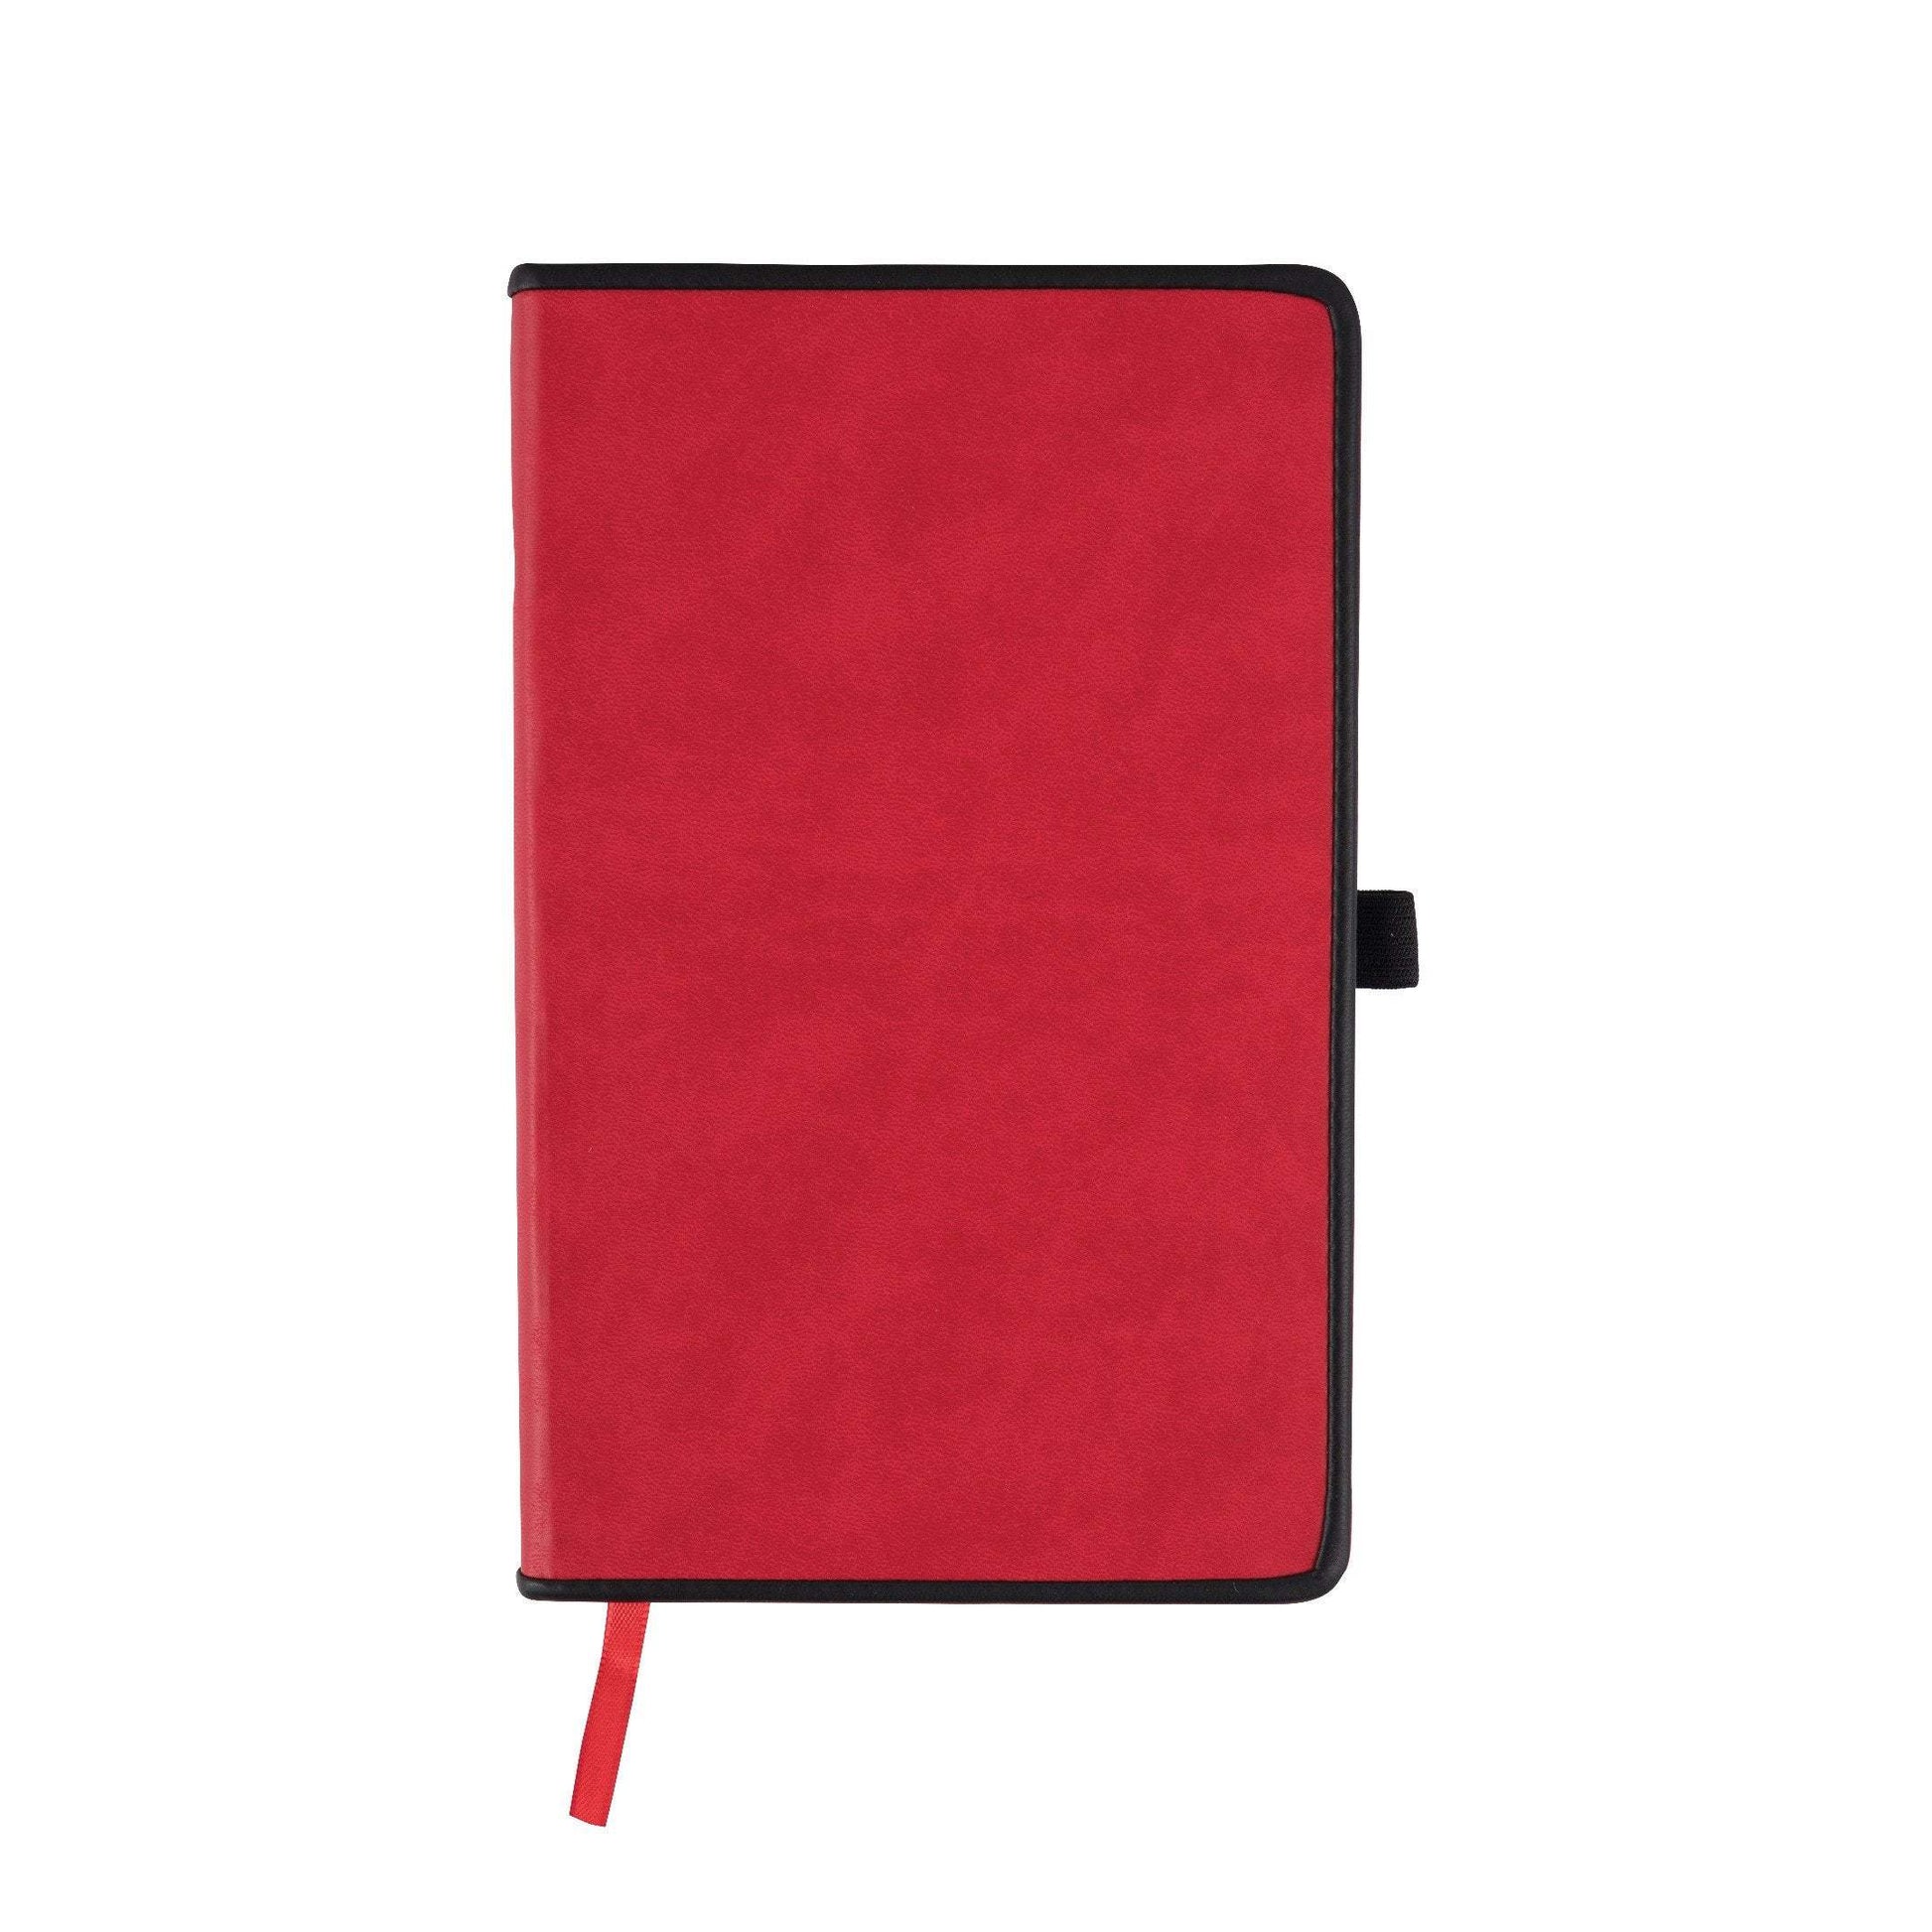 Border Notebook - Promotions Only Group Limited